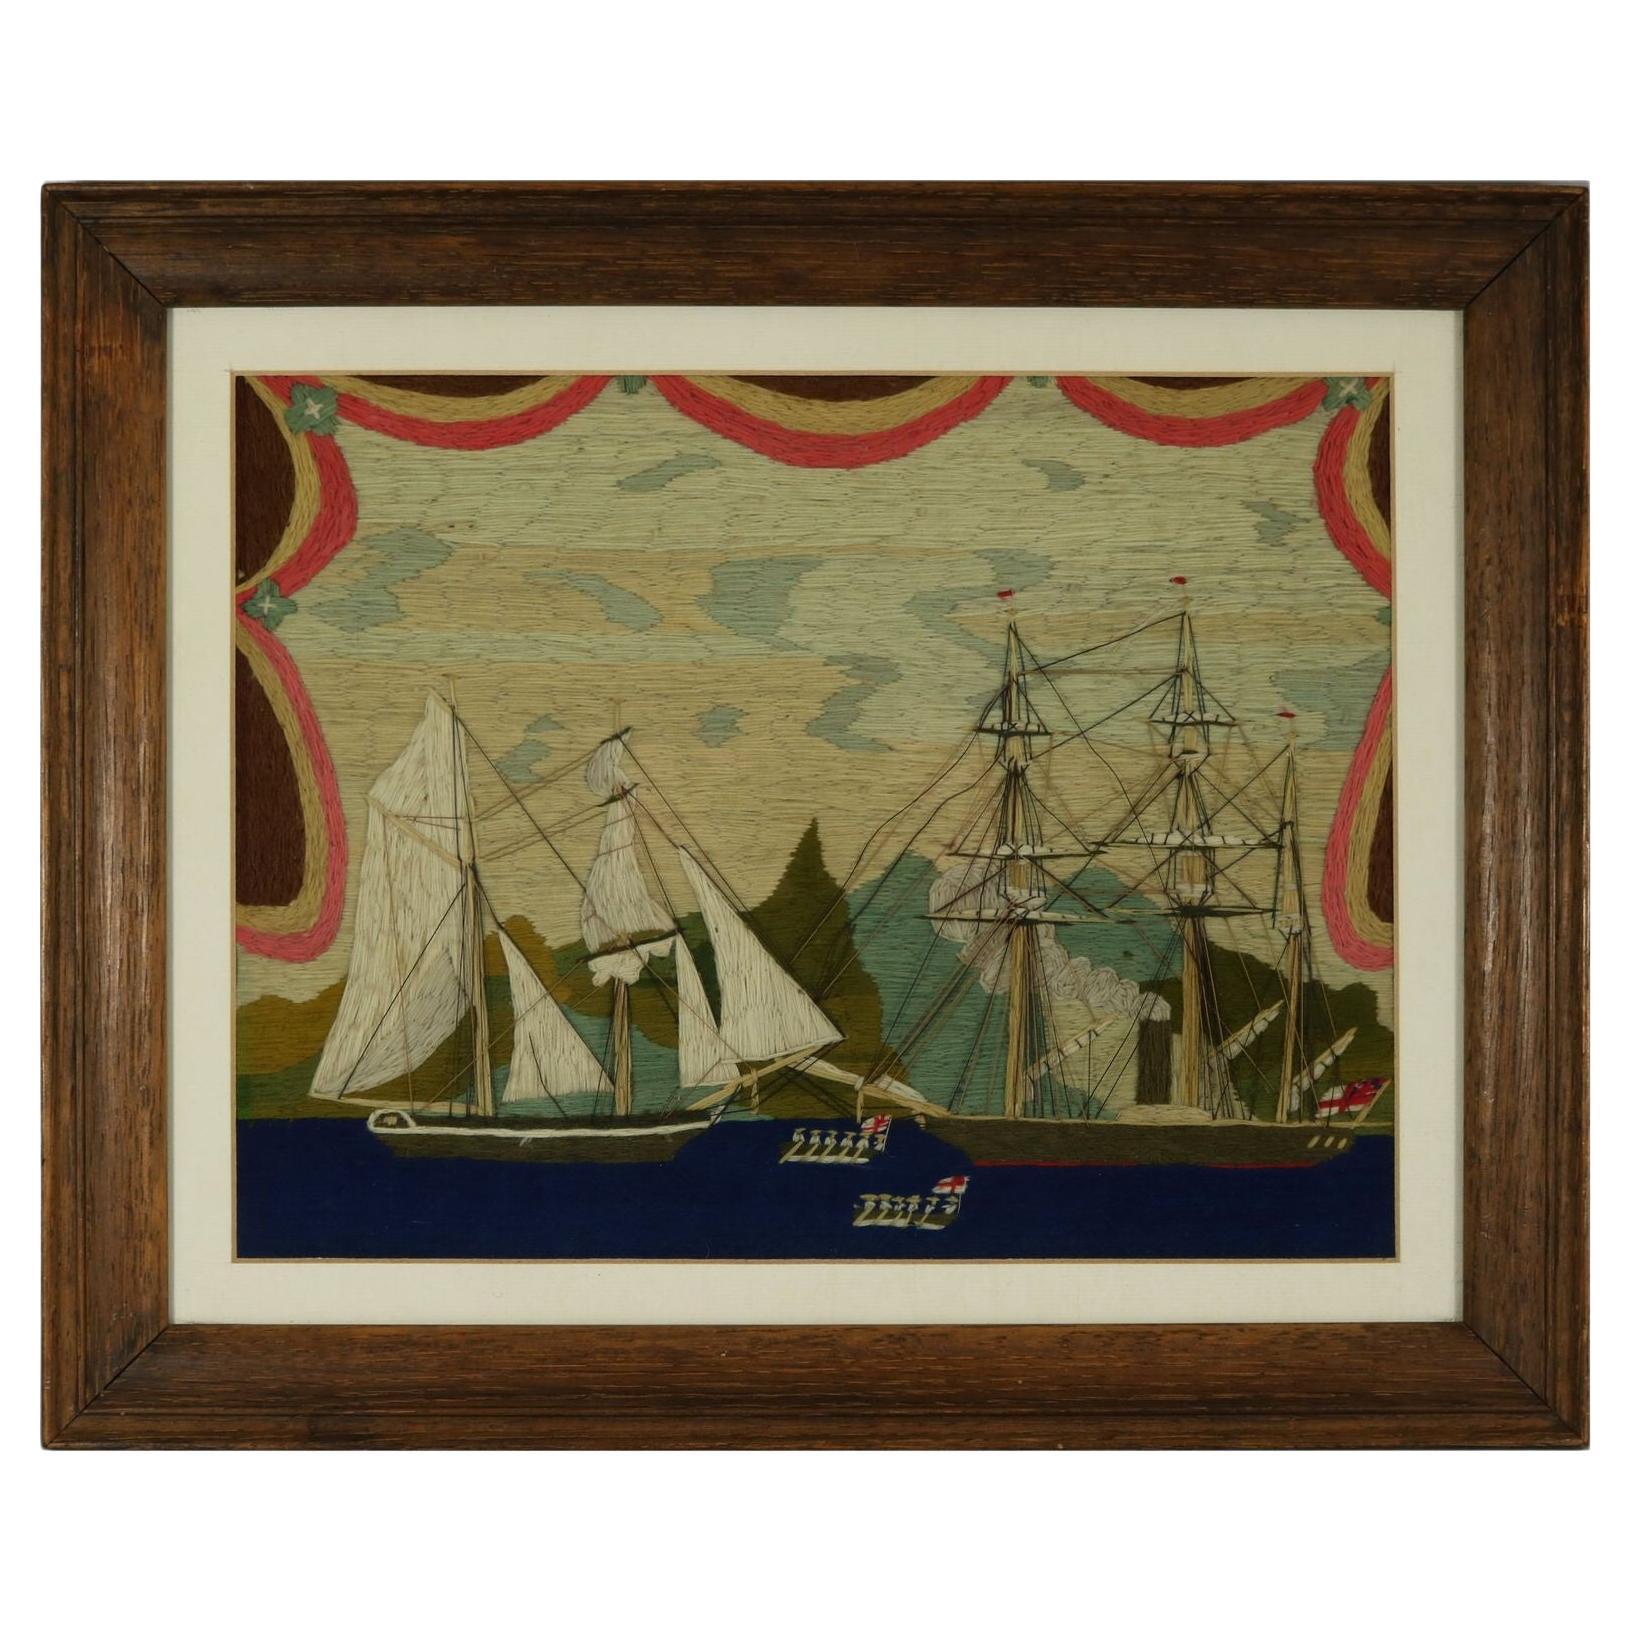 Victorian Sailor's Woolwork Picture of Ships and Rowing Boats